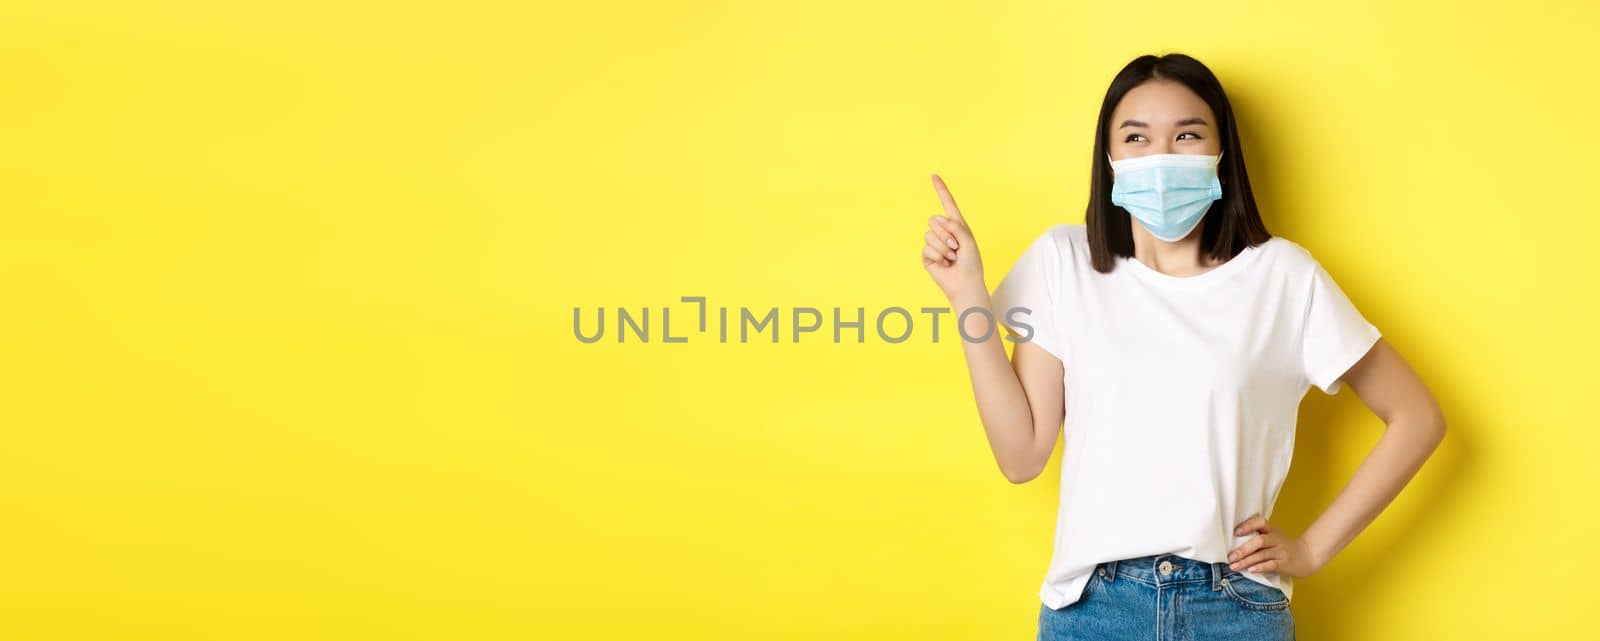 Covid, health care and pandemic concept. Asian woman in medical mask and white t-shirt pointing finger at upper left corner logo, showing promotion, yellow background.